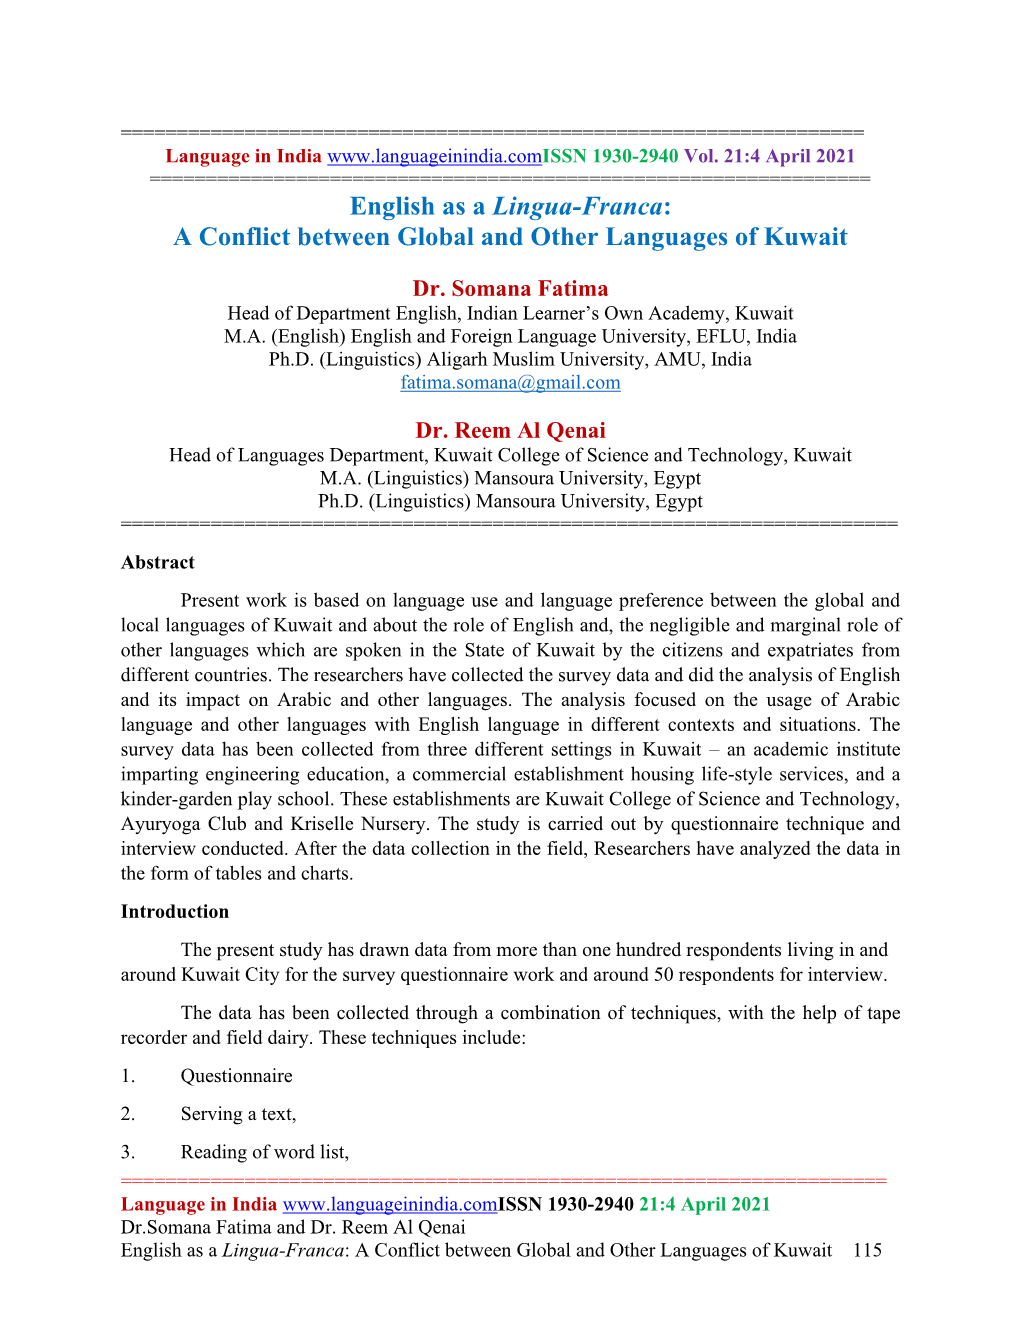 English As a Lingua-Franca: a Conflict Between Global and Other Languages of Kuwait